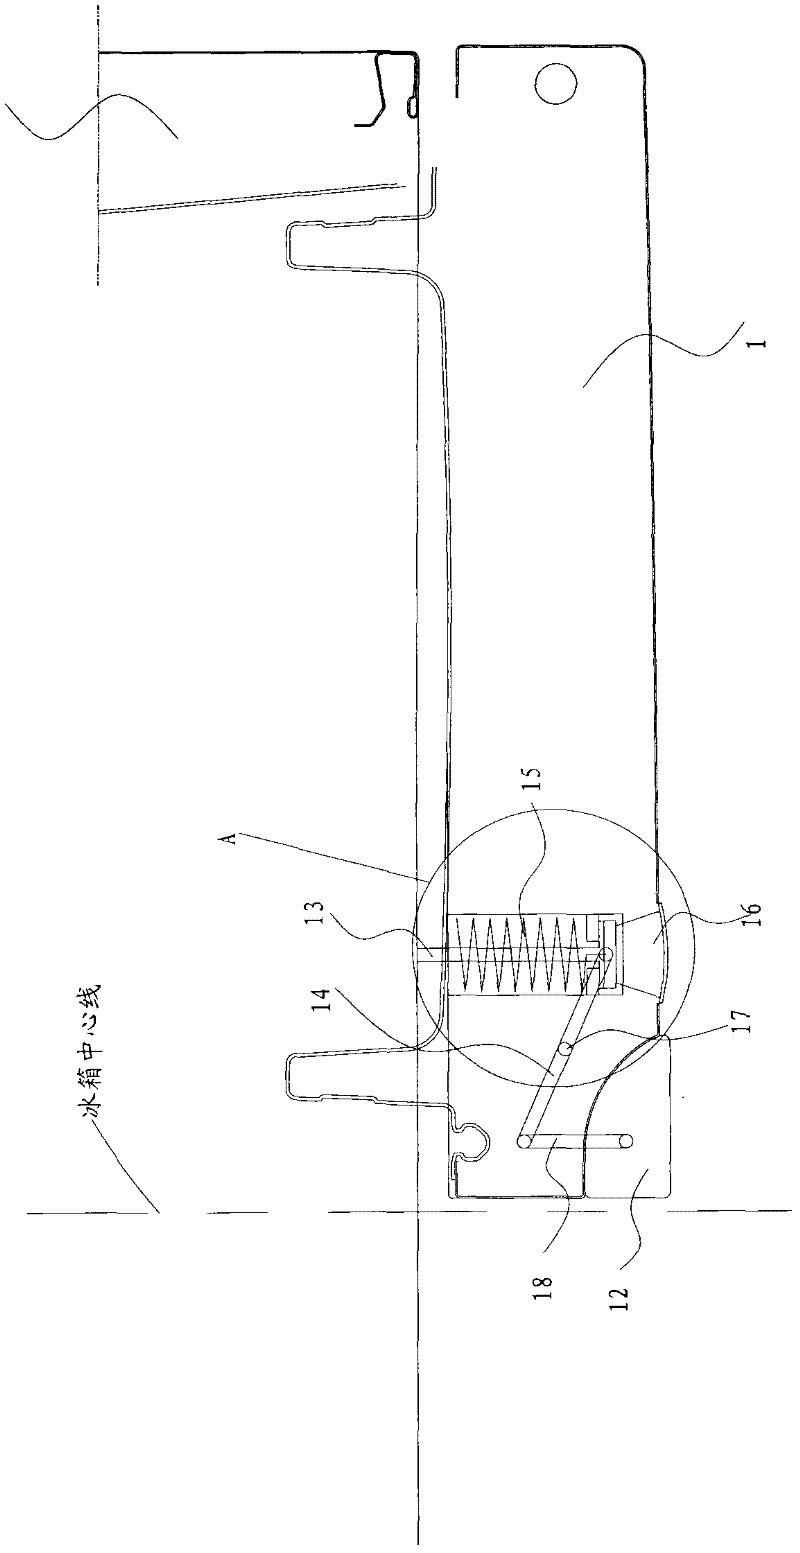 Cabinet door used for opening and closing cabinet body and refrigerator with same